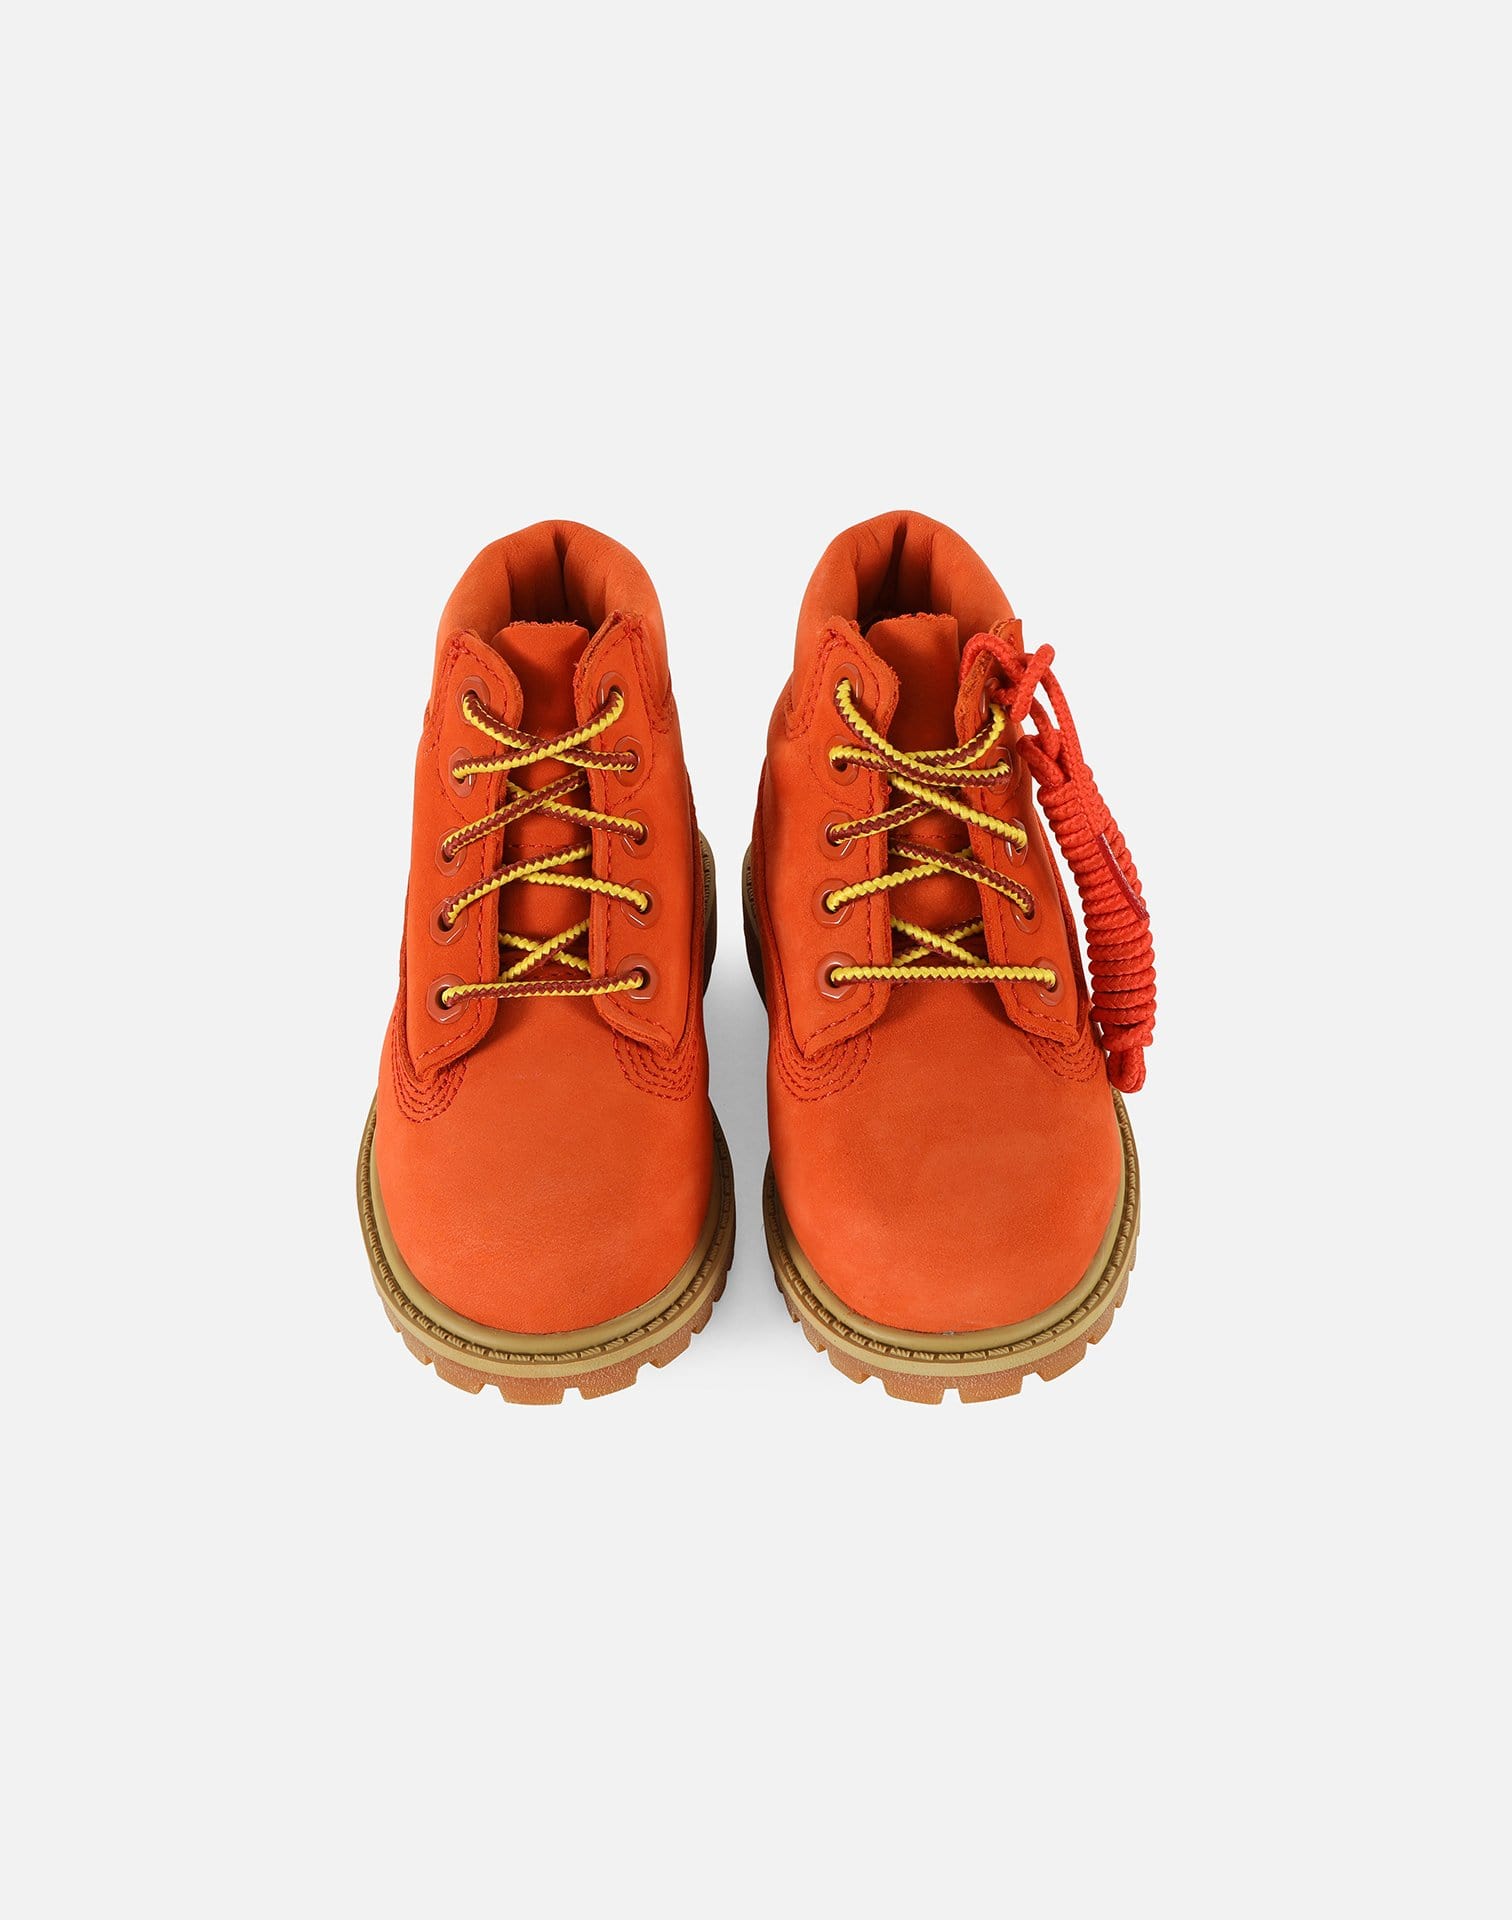 red boy timberland boots